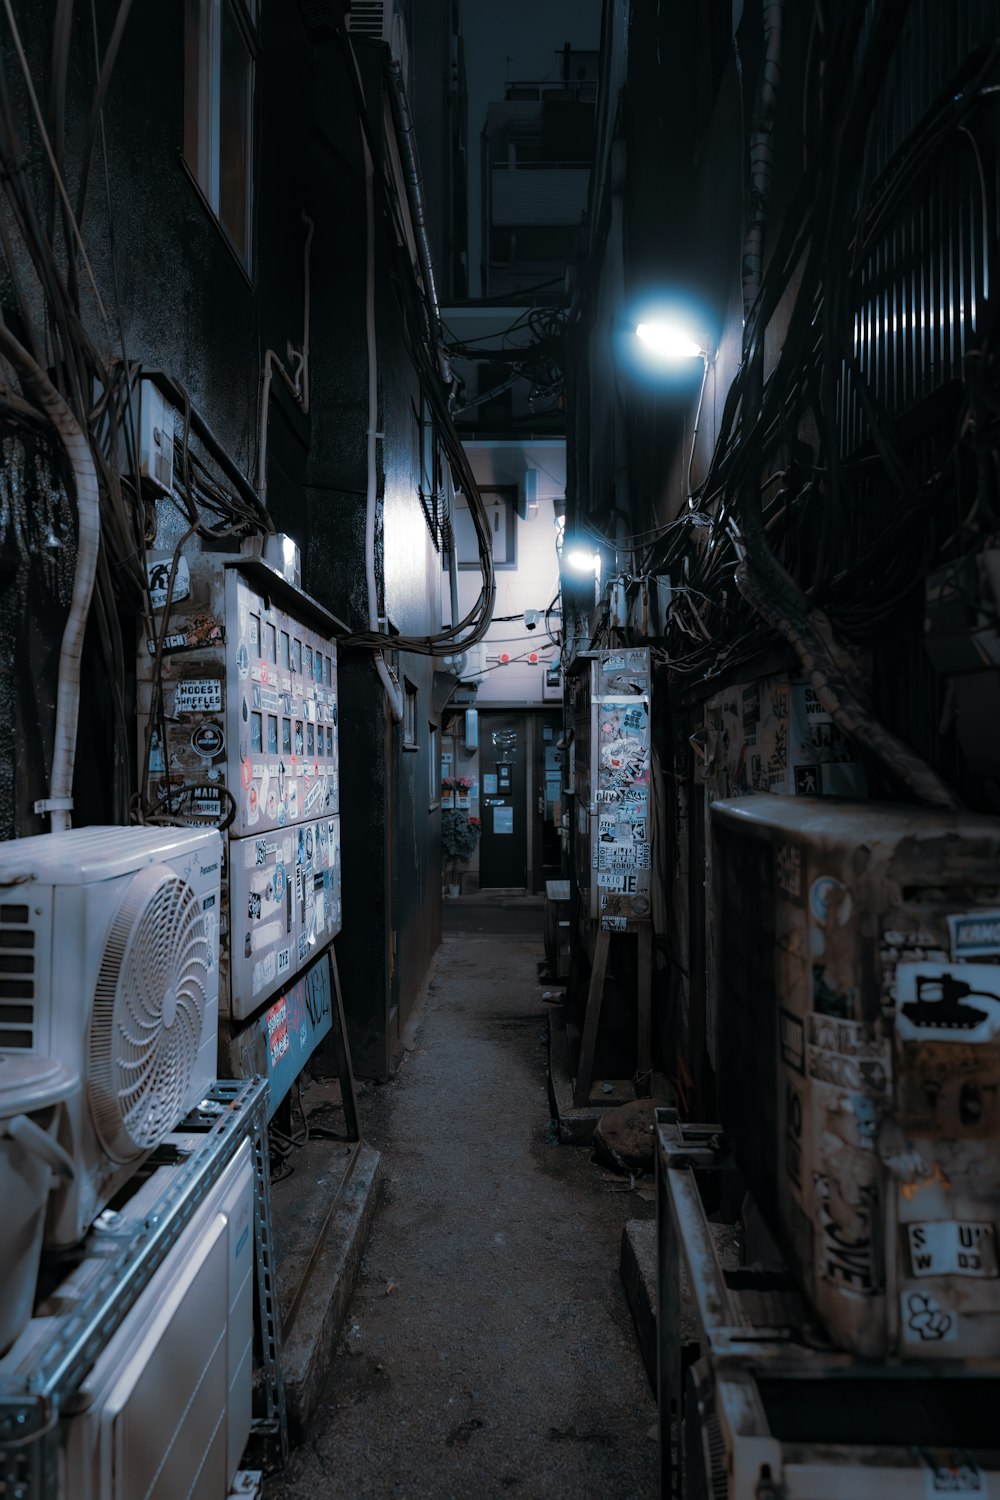 a dark alley with a bunch of old appliances